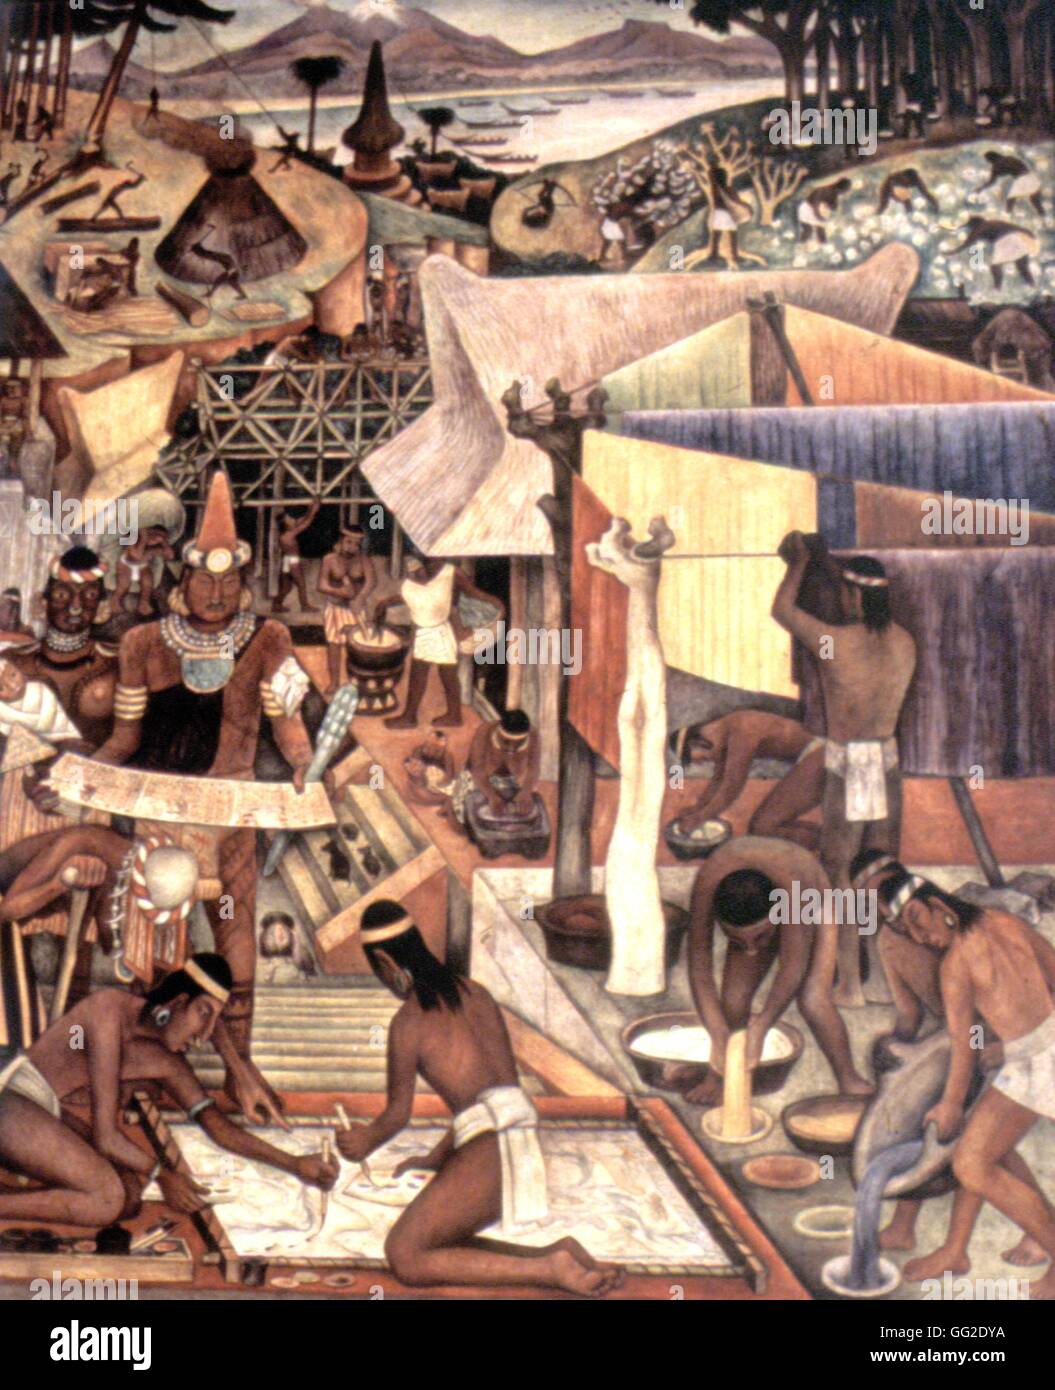 Diego Rivera (1886-1957) Fresco from the Palacio Nacional representing the Tarascan civilization (state of Michoacan) On the right, men preparing tincture for the material hang out. On the left, an astrologer predicting the future 1942 Mexico A. Grivas Stock Photo